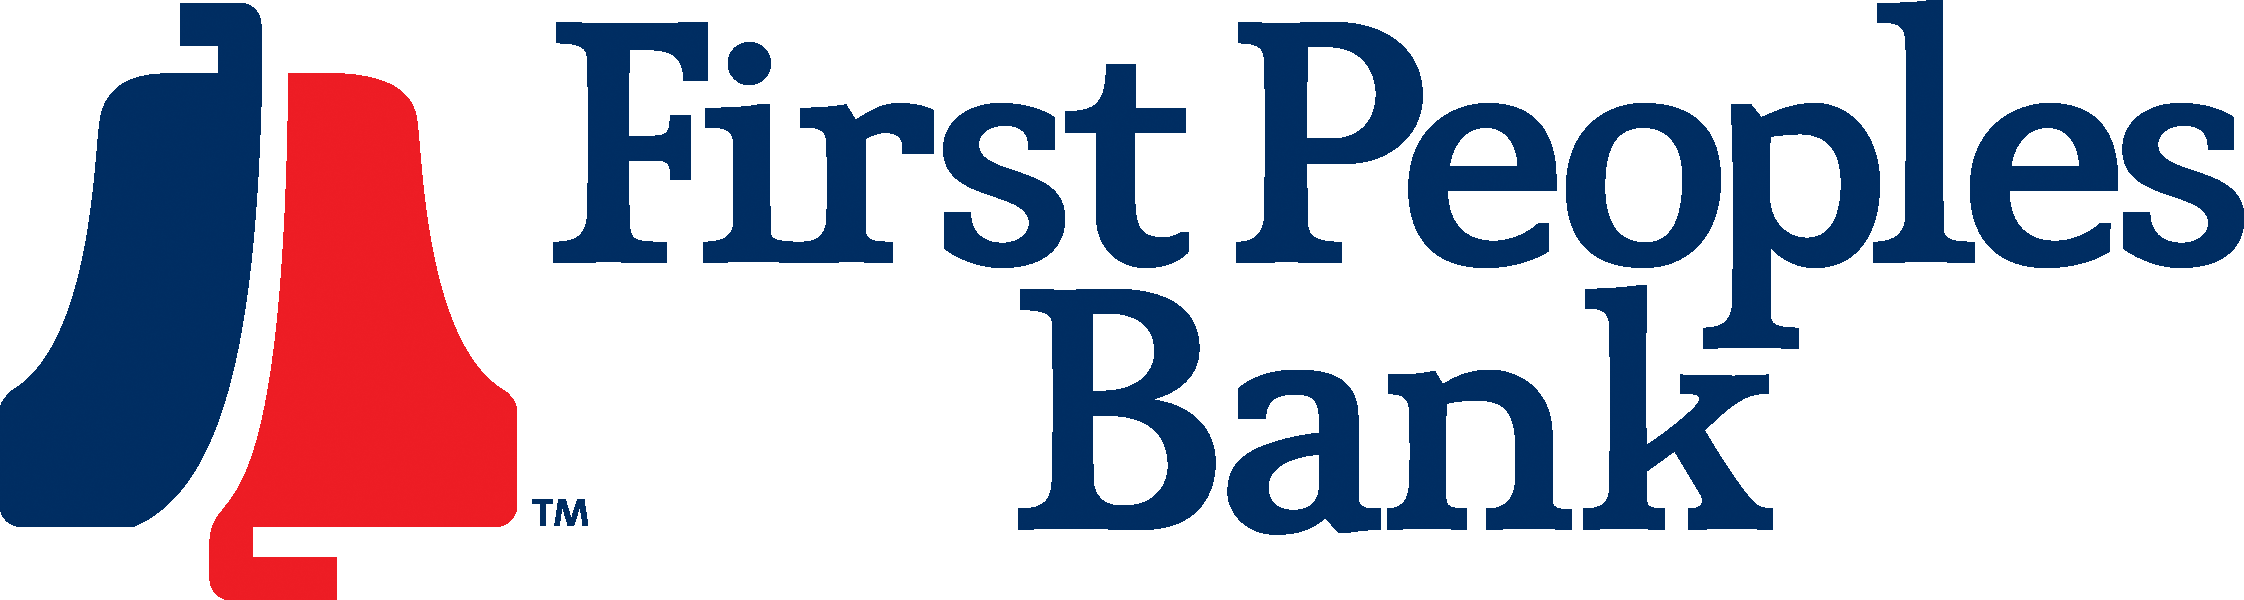 Peoples Bank Logo - MCG NEWS RELEASE: First Peoples Bank Reveals New Identity, Website